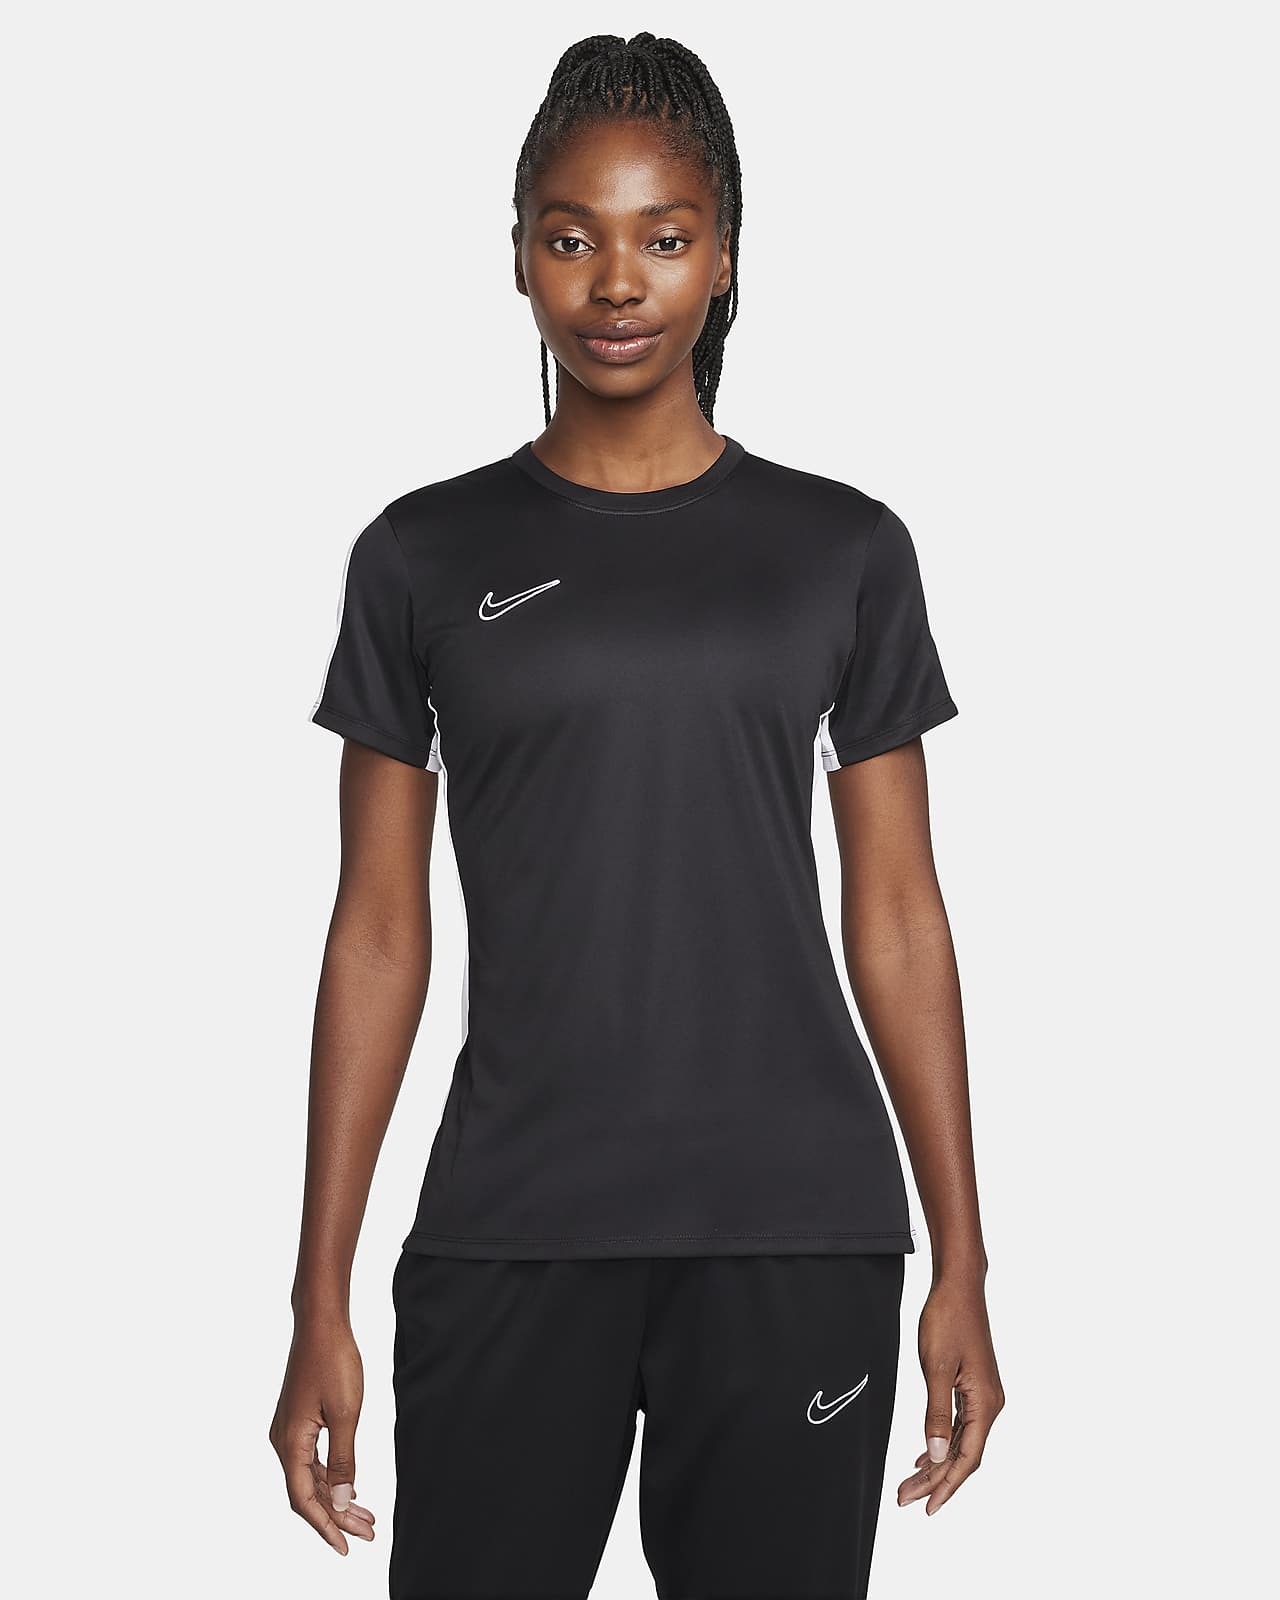 Women's Style Your Air Tight Dri-FIT. Nike LU